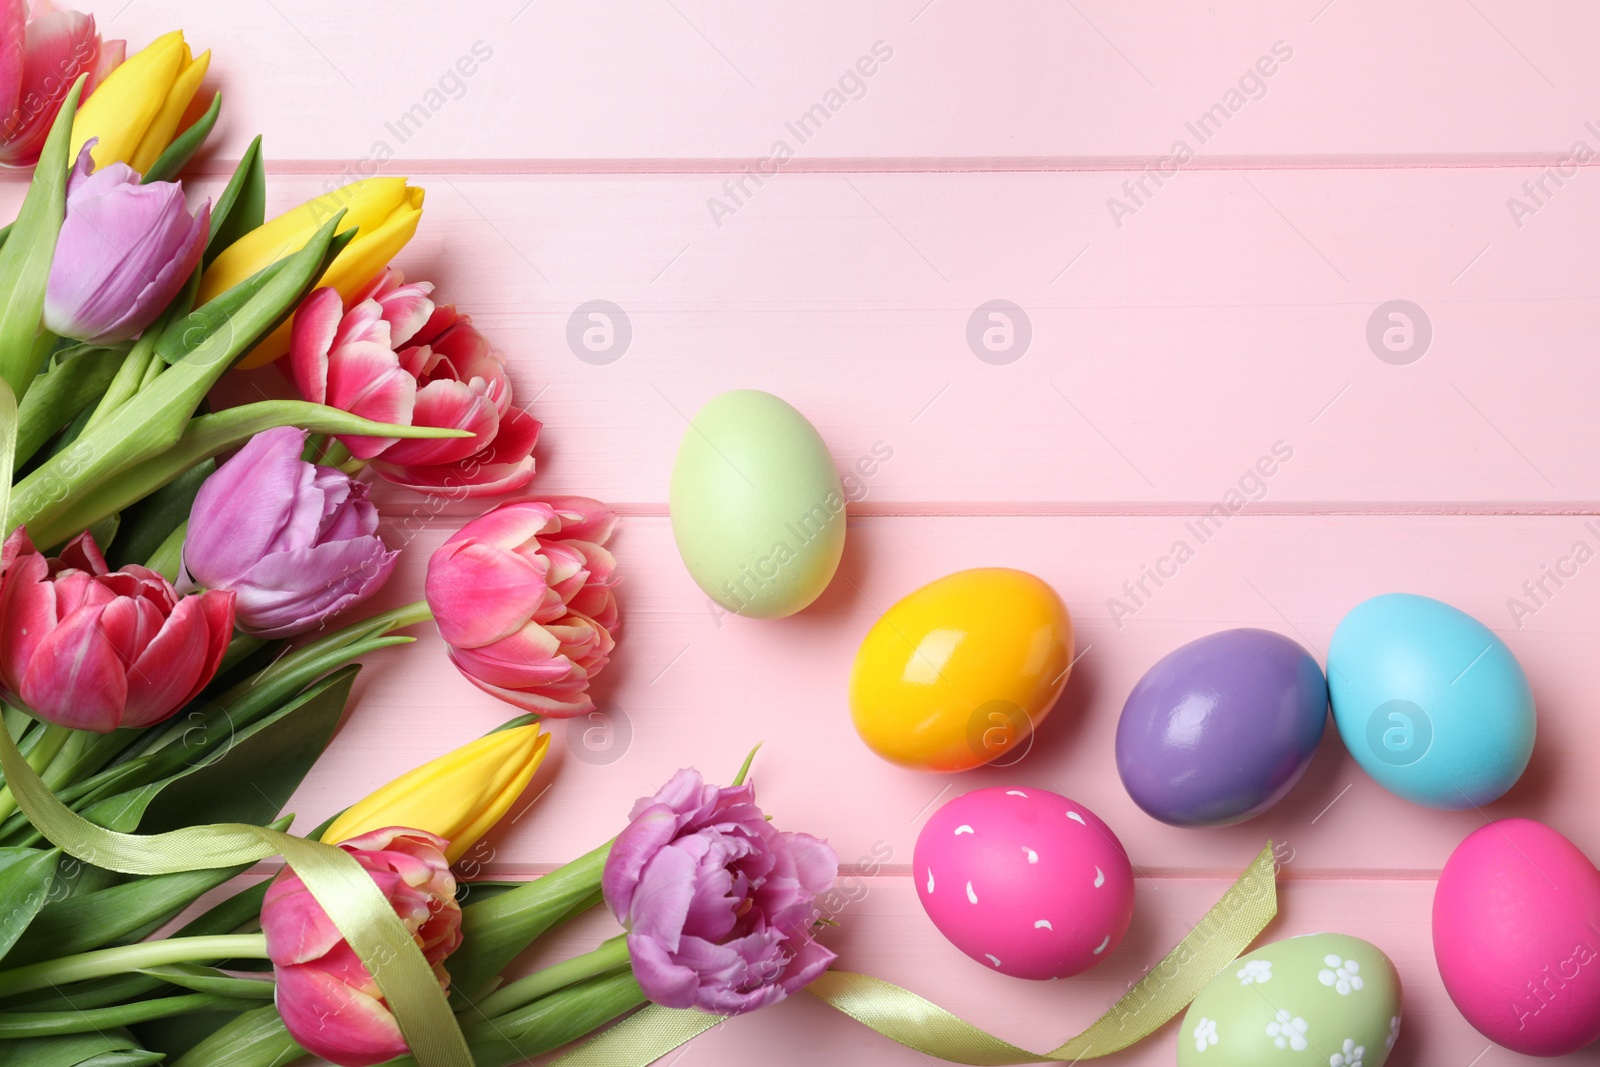 Photo of Bright painted eggs and spring tulips on pink wooden table, flat lay with space for text. Happy Easter